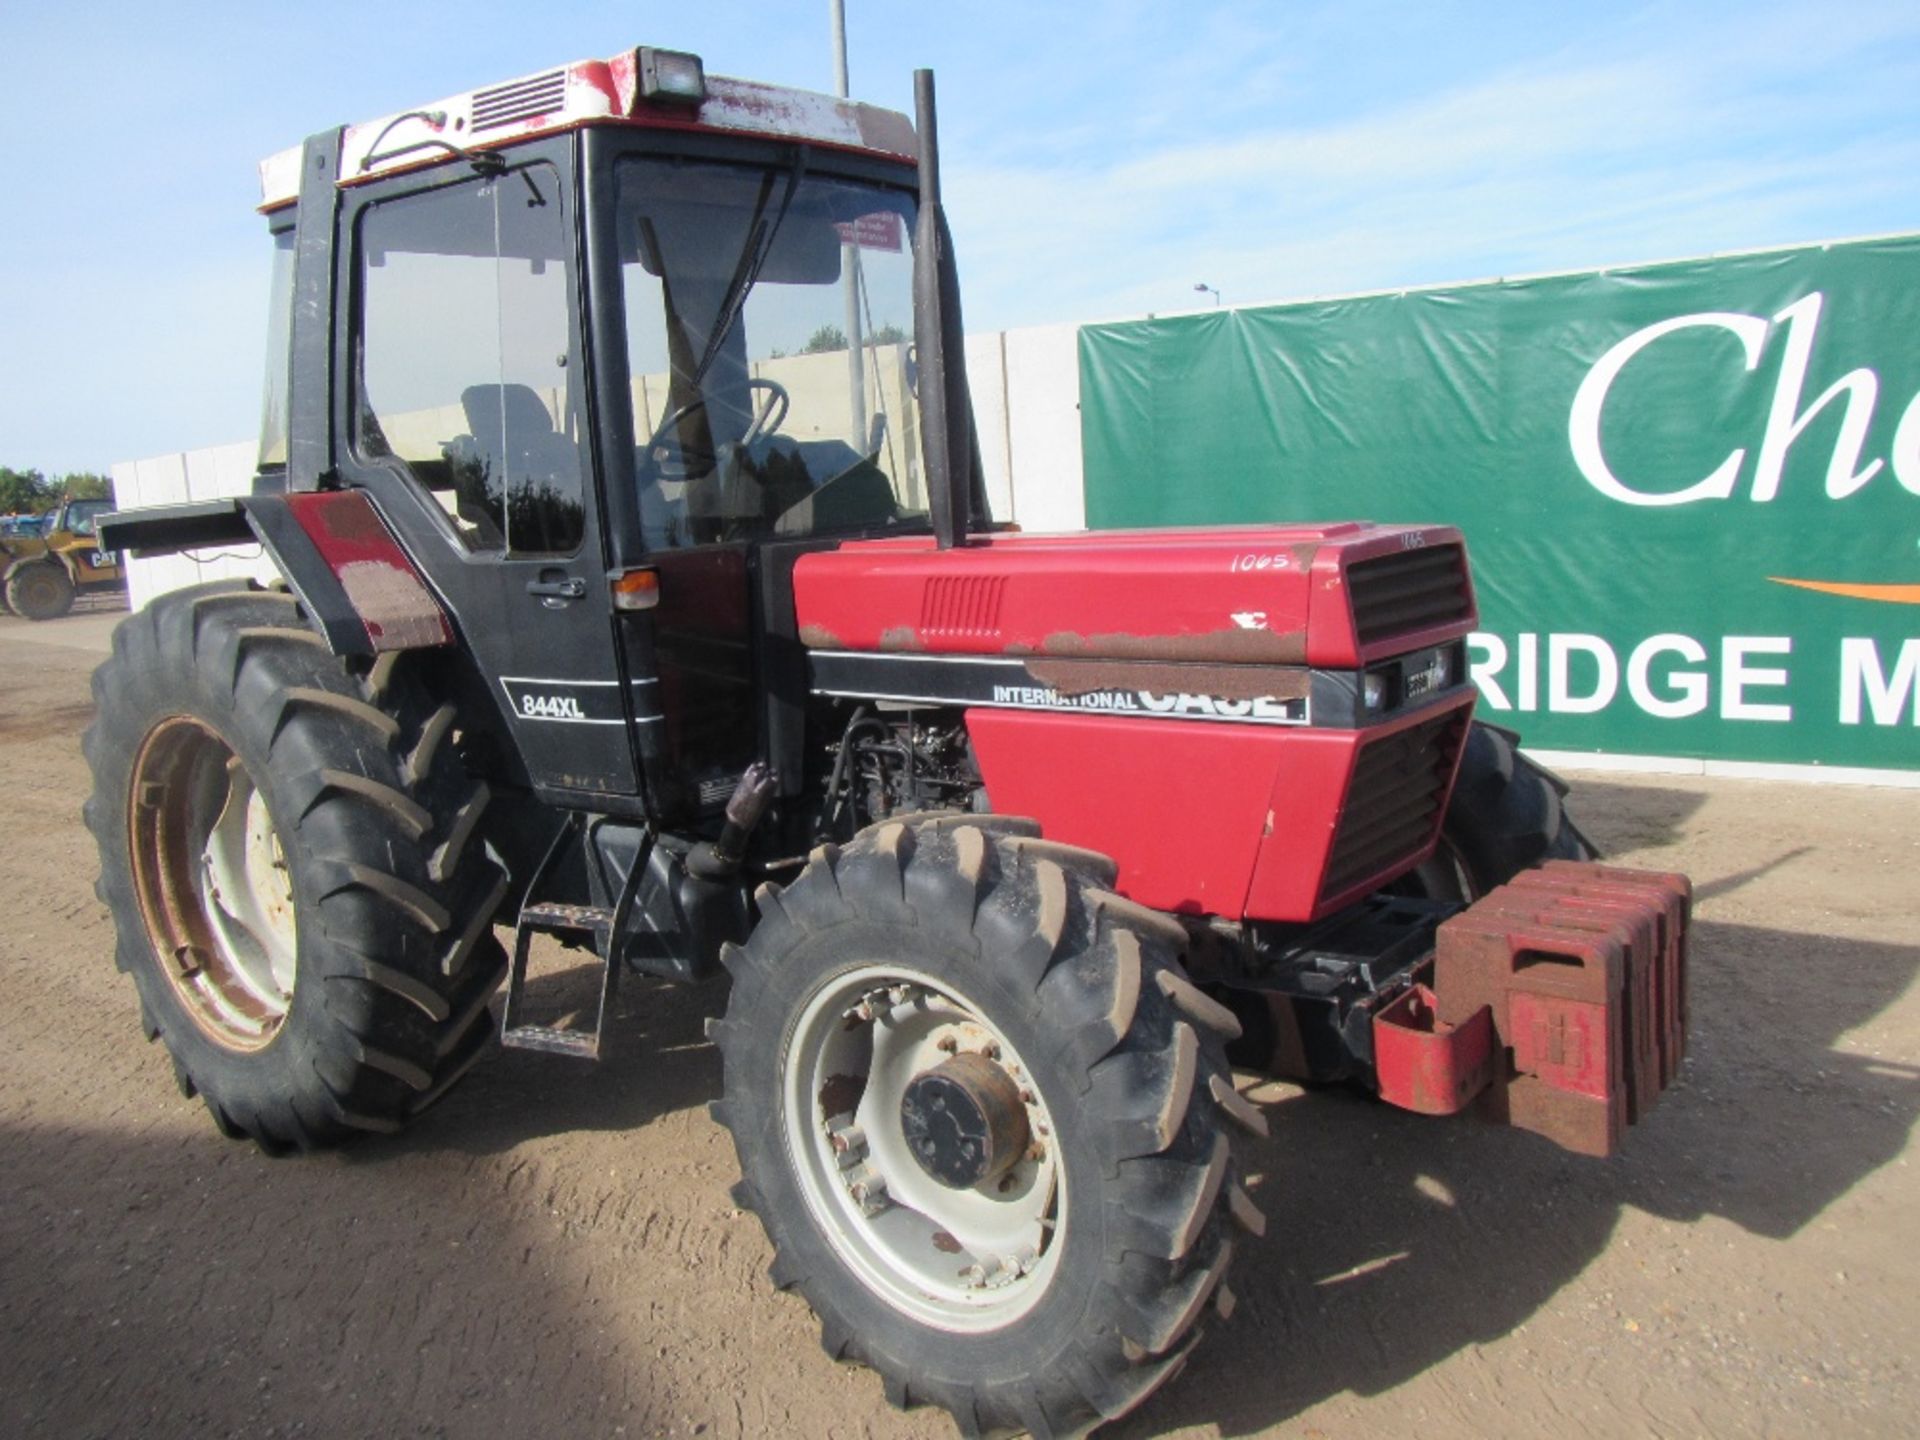 1992 Case International 844XL 4wd Tractor Reg. No. K394 PPV - Image 3 of 15